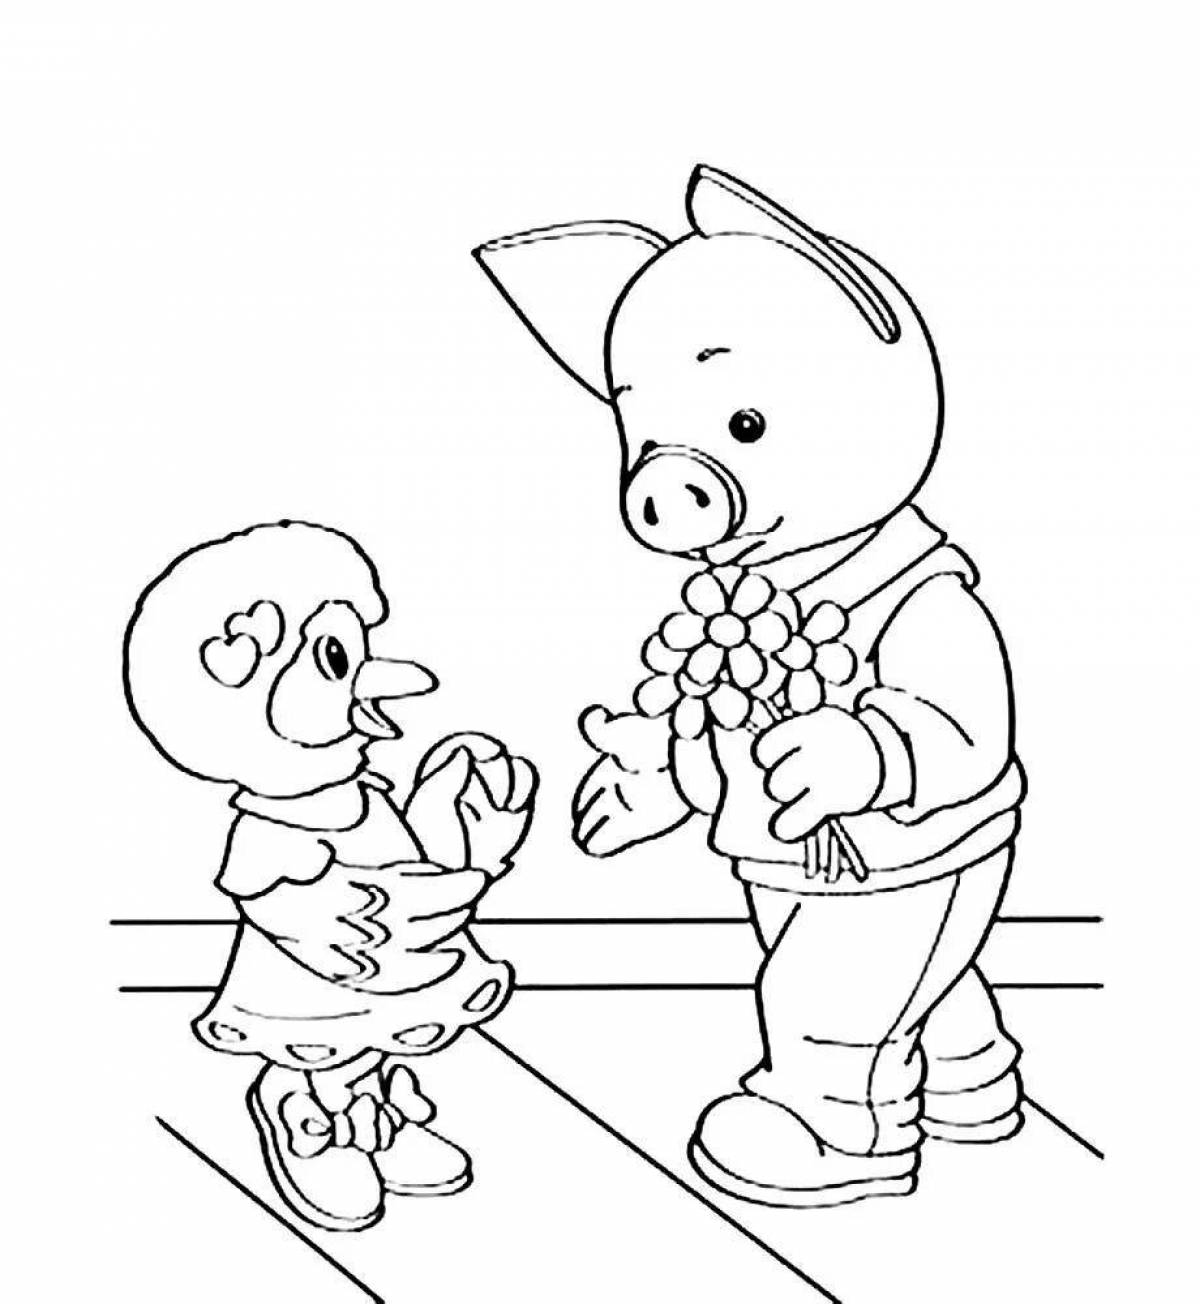 Coloring page wild pig and stepashka